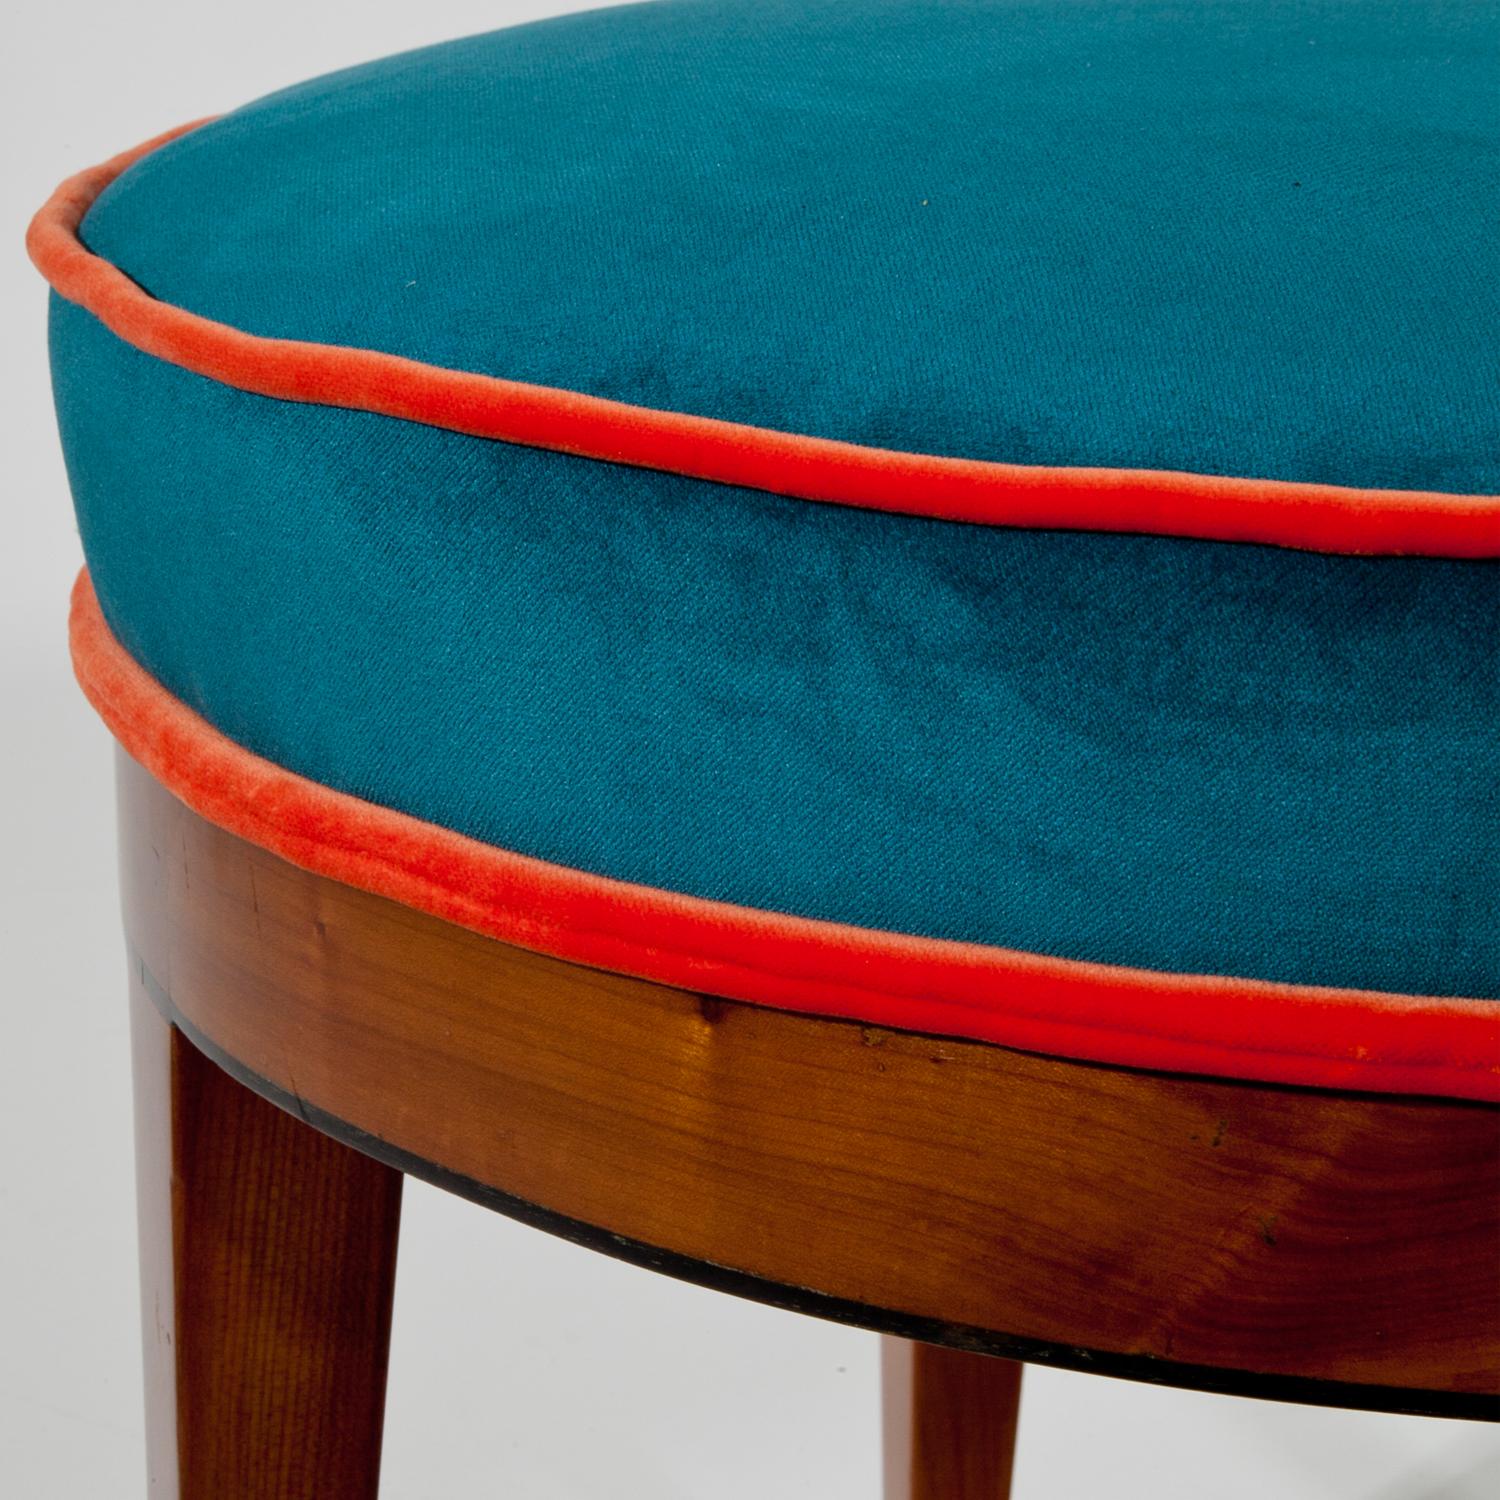 Round Biedermeier stool standing on tapered legs, made out of cherrywood. The railing is accentuated towards the lower edge in black. The stool was reupholstered with a blue fabric and orange piping.